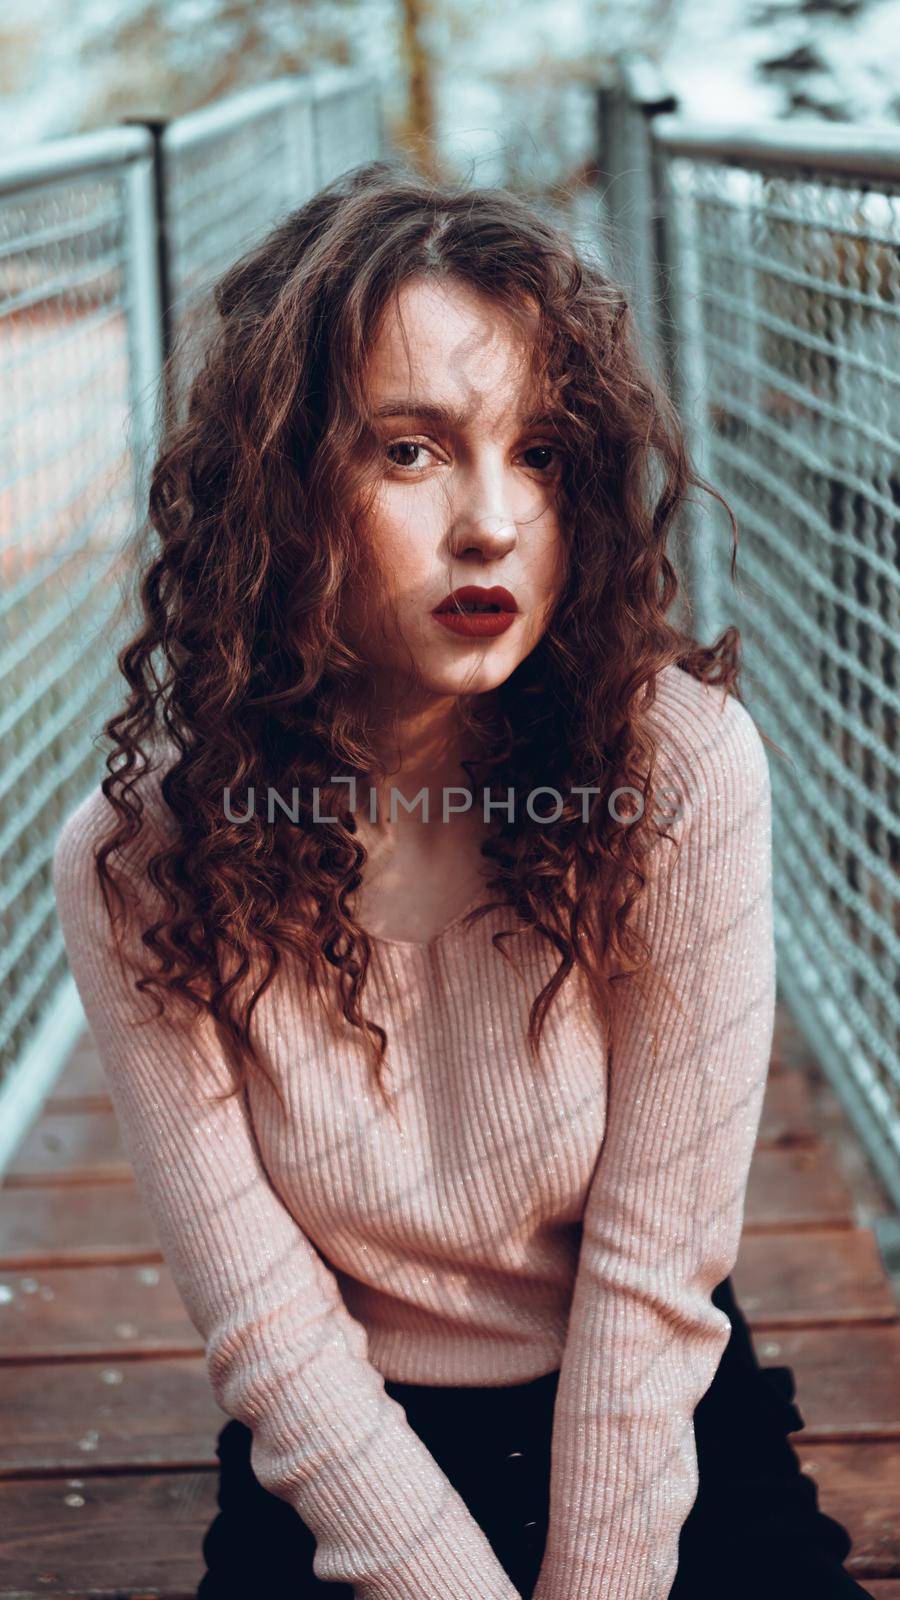 Fashion portrait of trendy young woman sitting near the netting rabitz by natali_brill